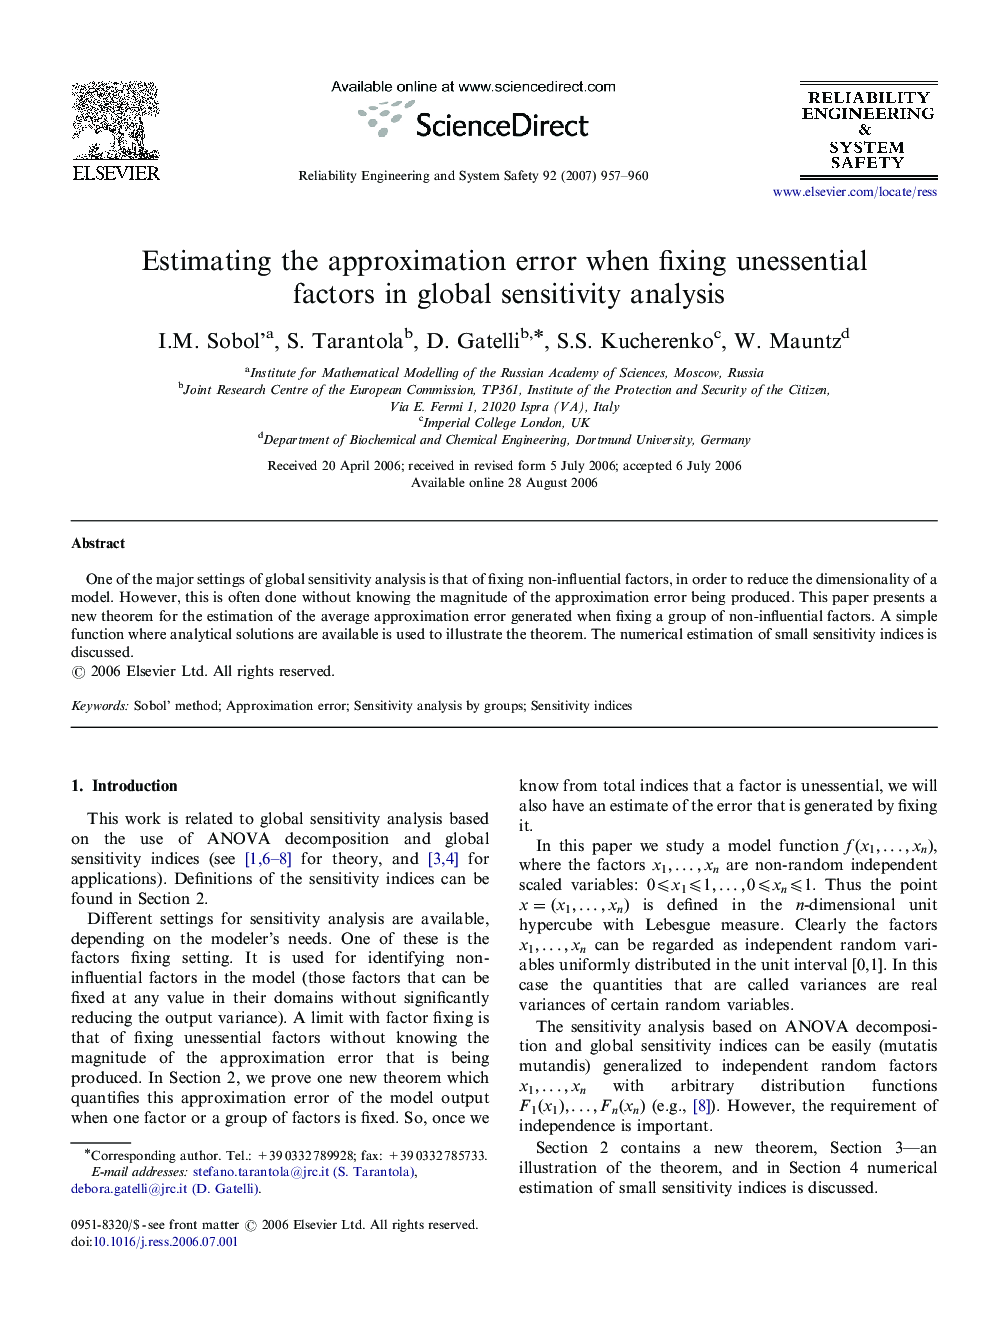 Estimating the approximation error when fixing unessential factors in global sensitivity analysis